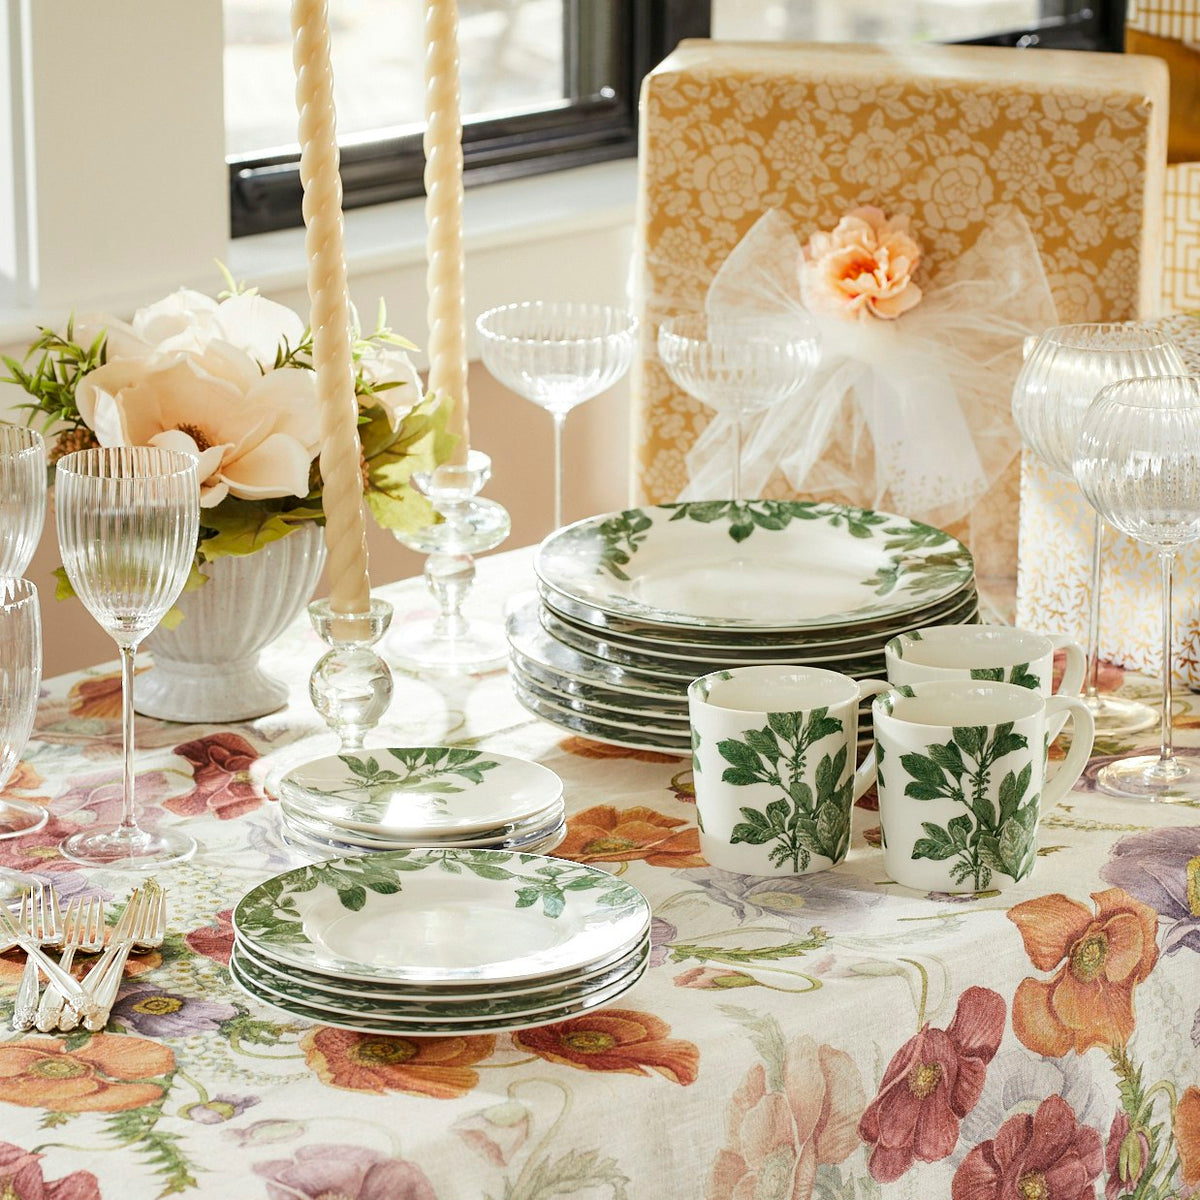 A botanical-themed table setting with Caskata Arbor Green Small Plates, matching mugs, crystal glassware, a floral centerpiece, candles, and a wrapped gift box with a bow.